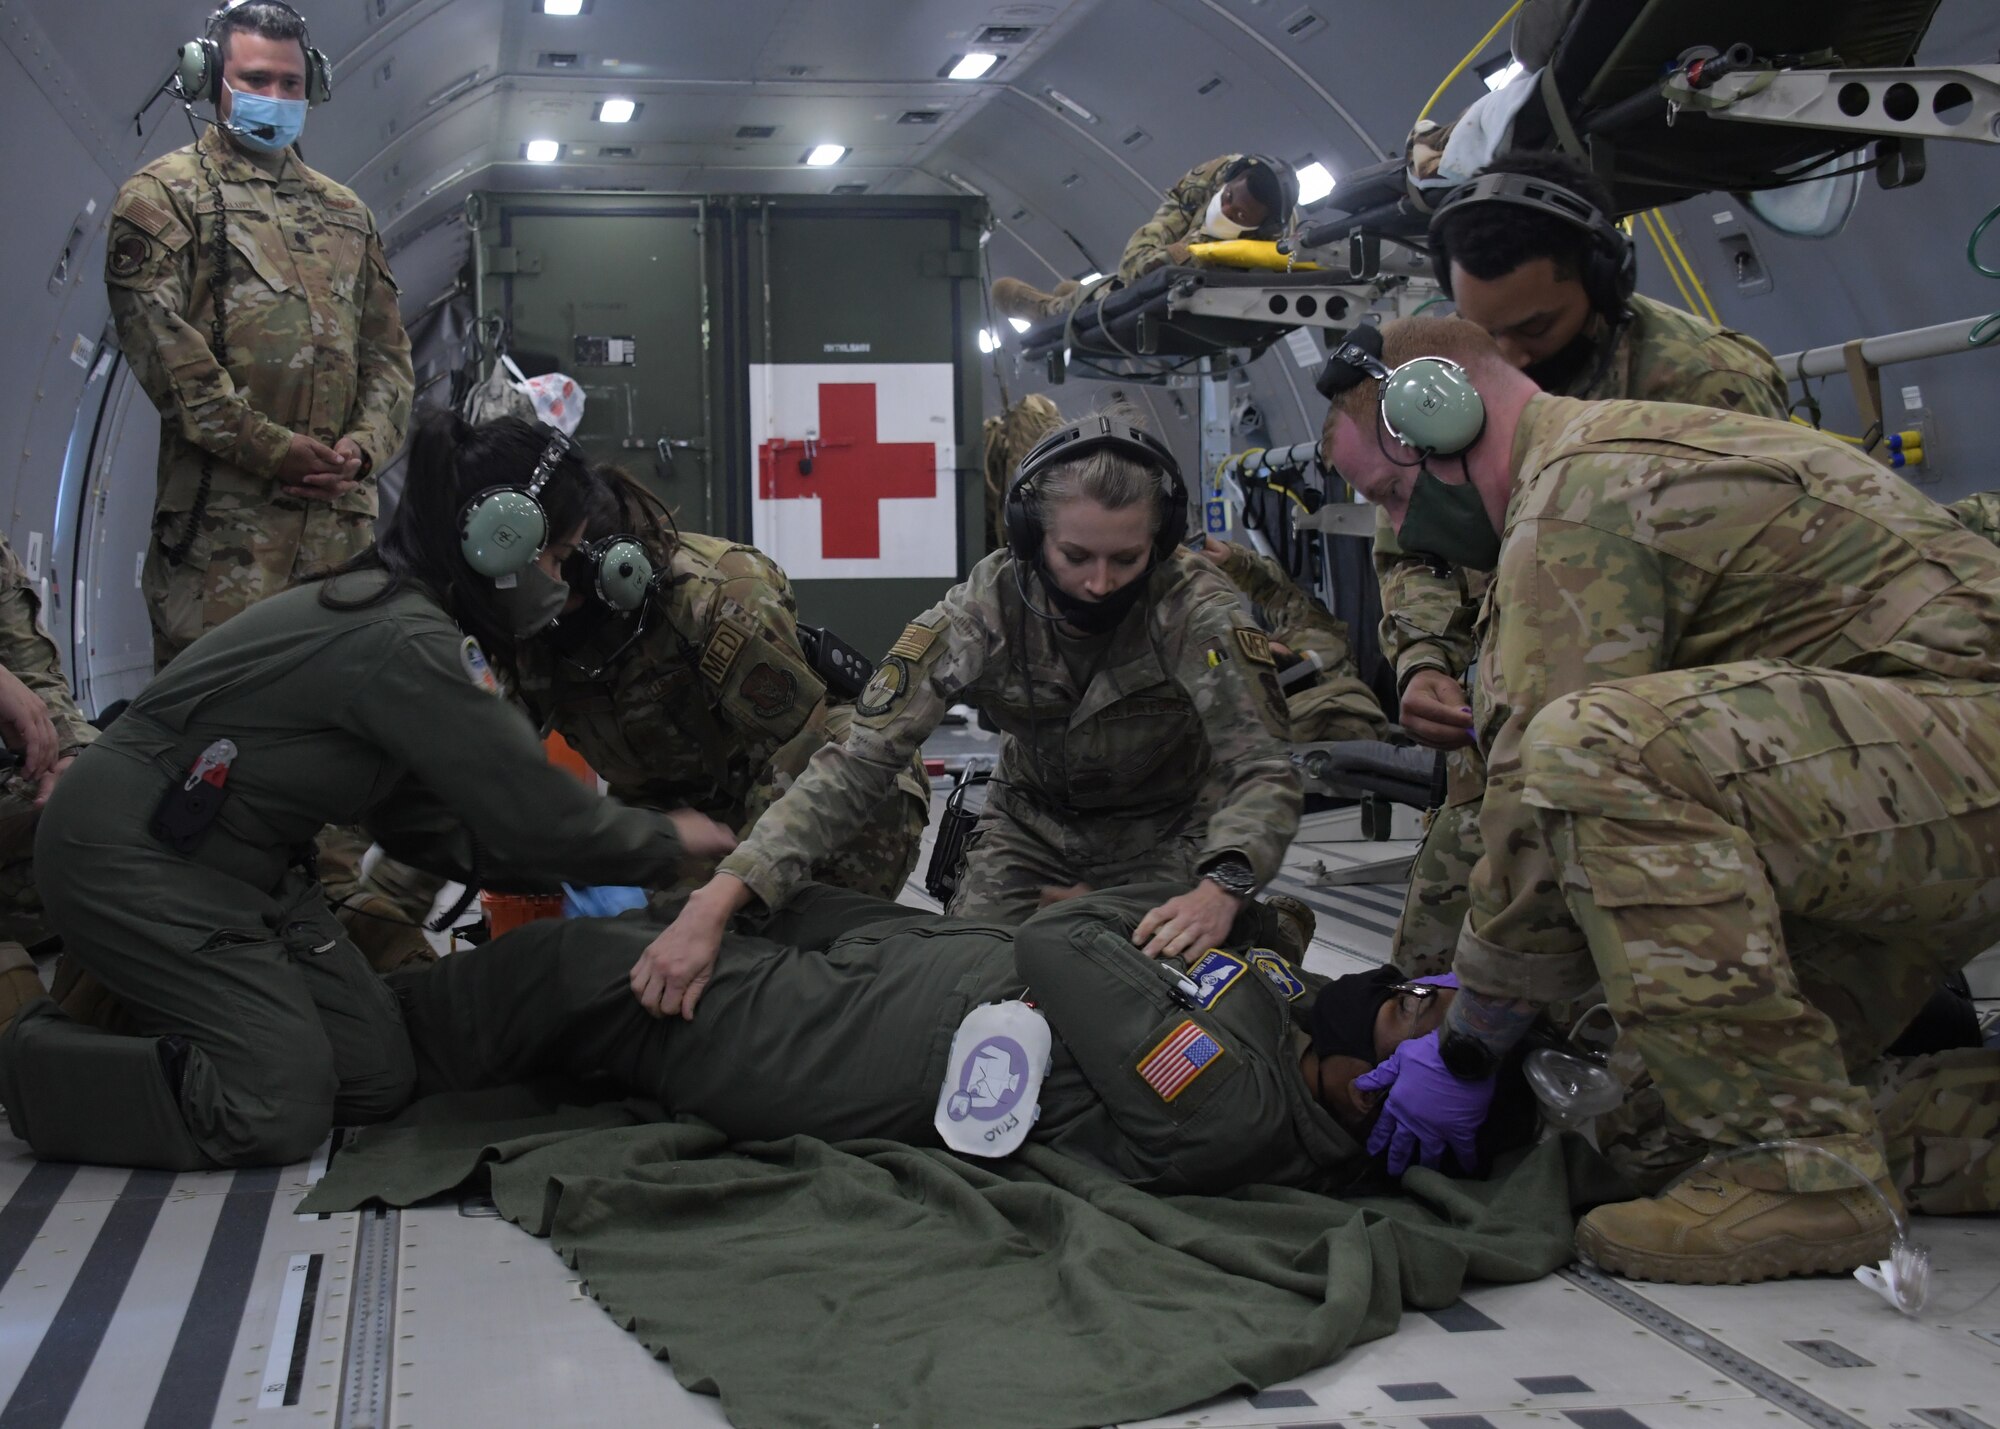 Aeromedical evacuation Airmen perform treat a patient during an in-air medical emergency exercise aboard a new KC-46A Pegasus, April 23, 2021. The tanker, from the 916th Air Refueling Wing, was flown by the 77th Air Refueling Squadron, and was used by the aeromedical Airmen to become more familiar with the aircraft and its aeromedical evacuation capabilities. (U.S. Air Force photo by Tech. Sgt. Miles Wilson)